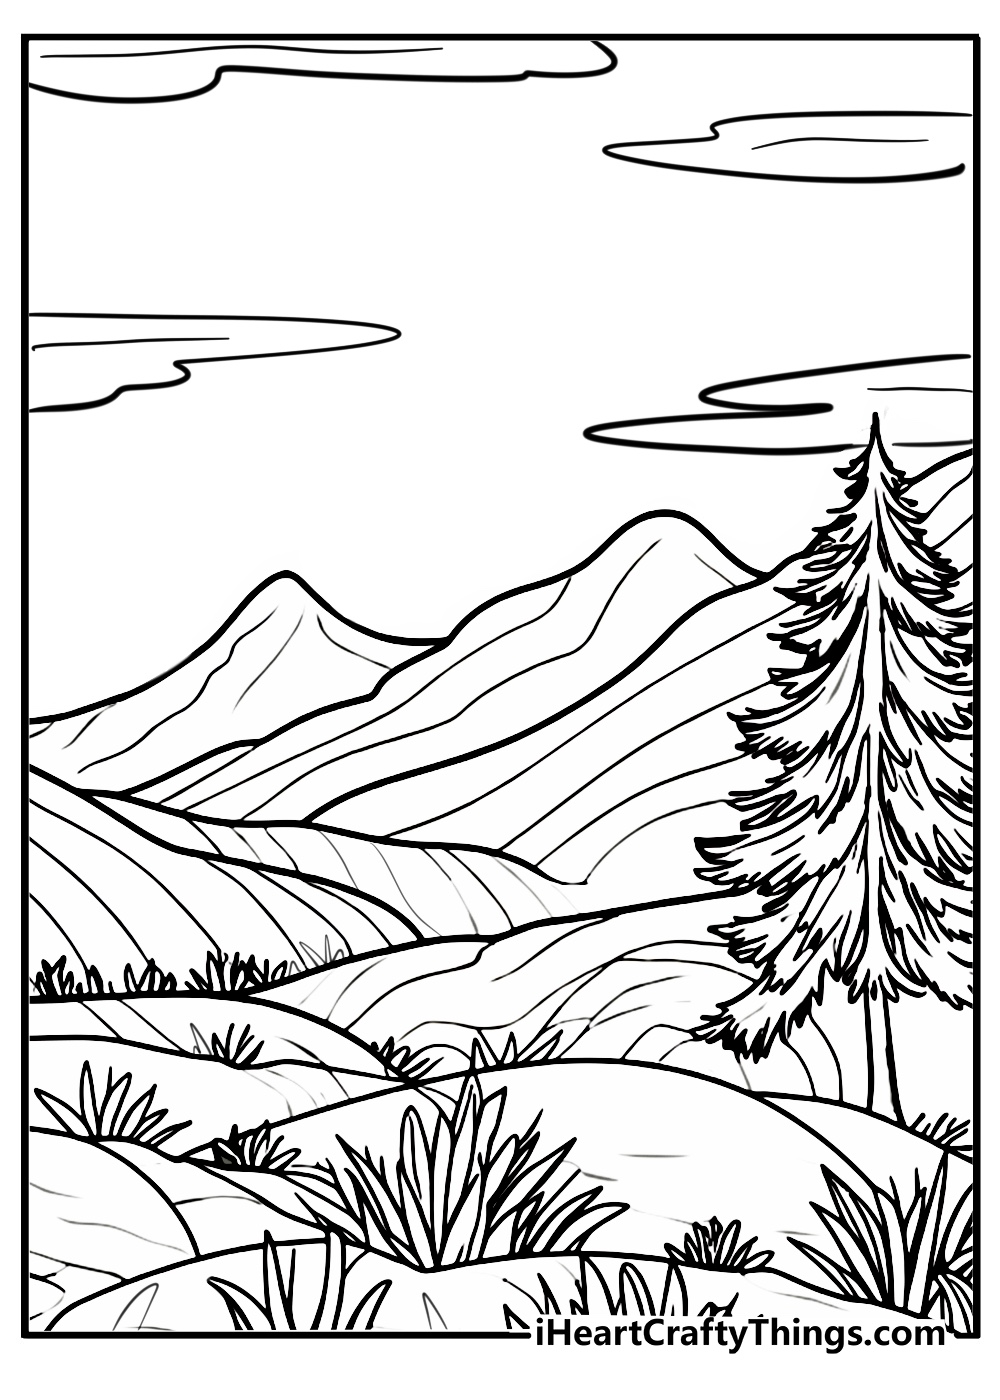 Aesthetic coloring pages for adults